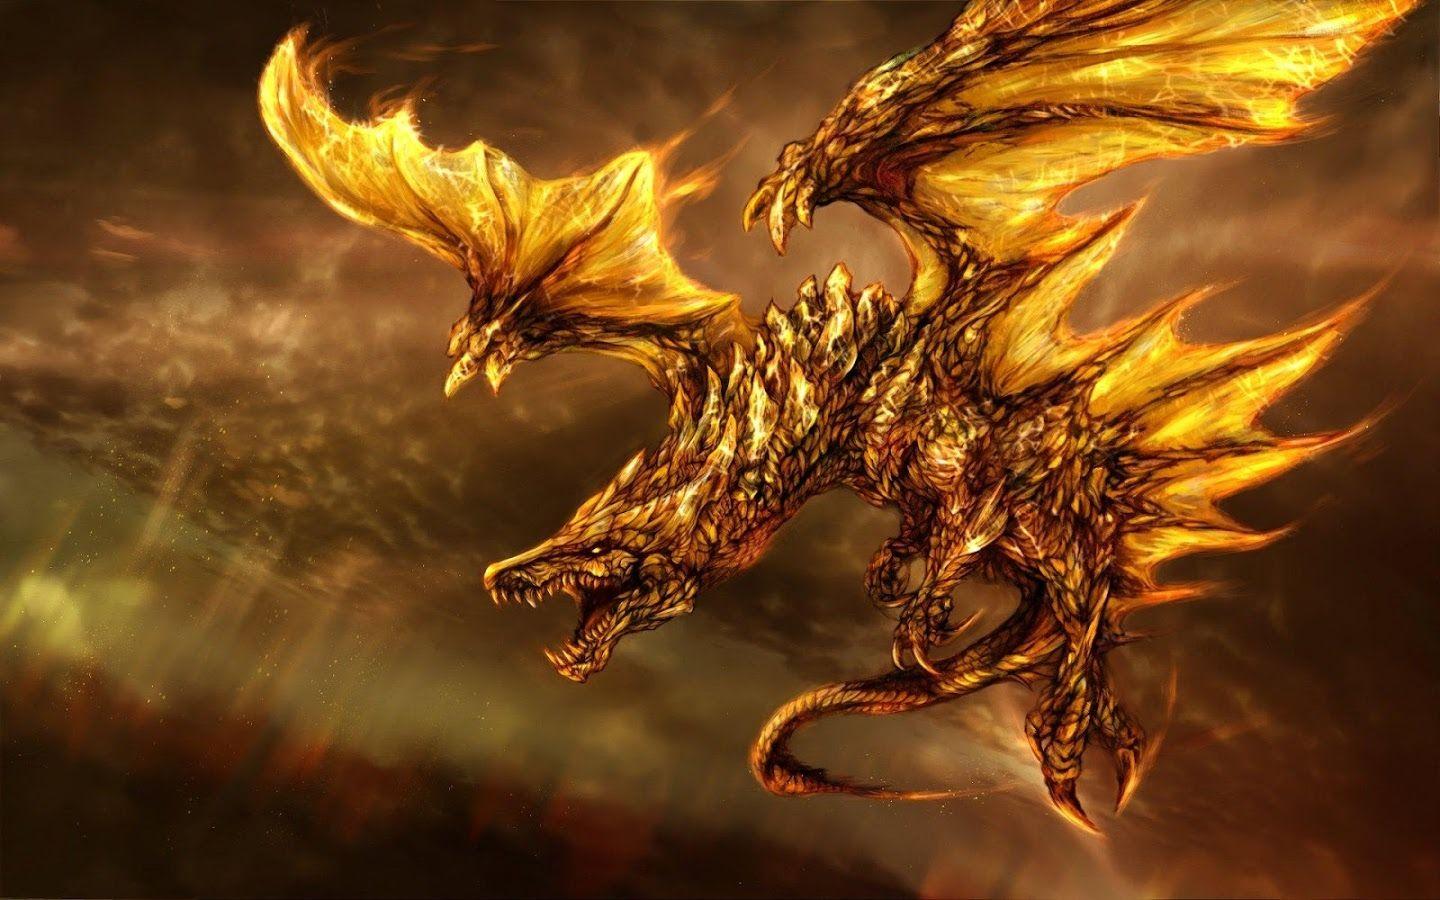 Fire Dragon Live Wallpaper Apps on Google Play